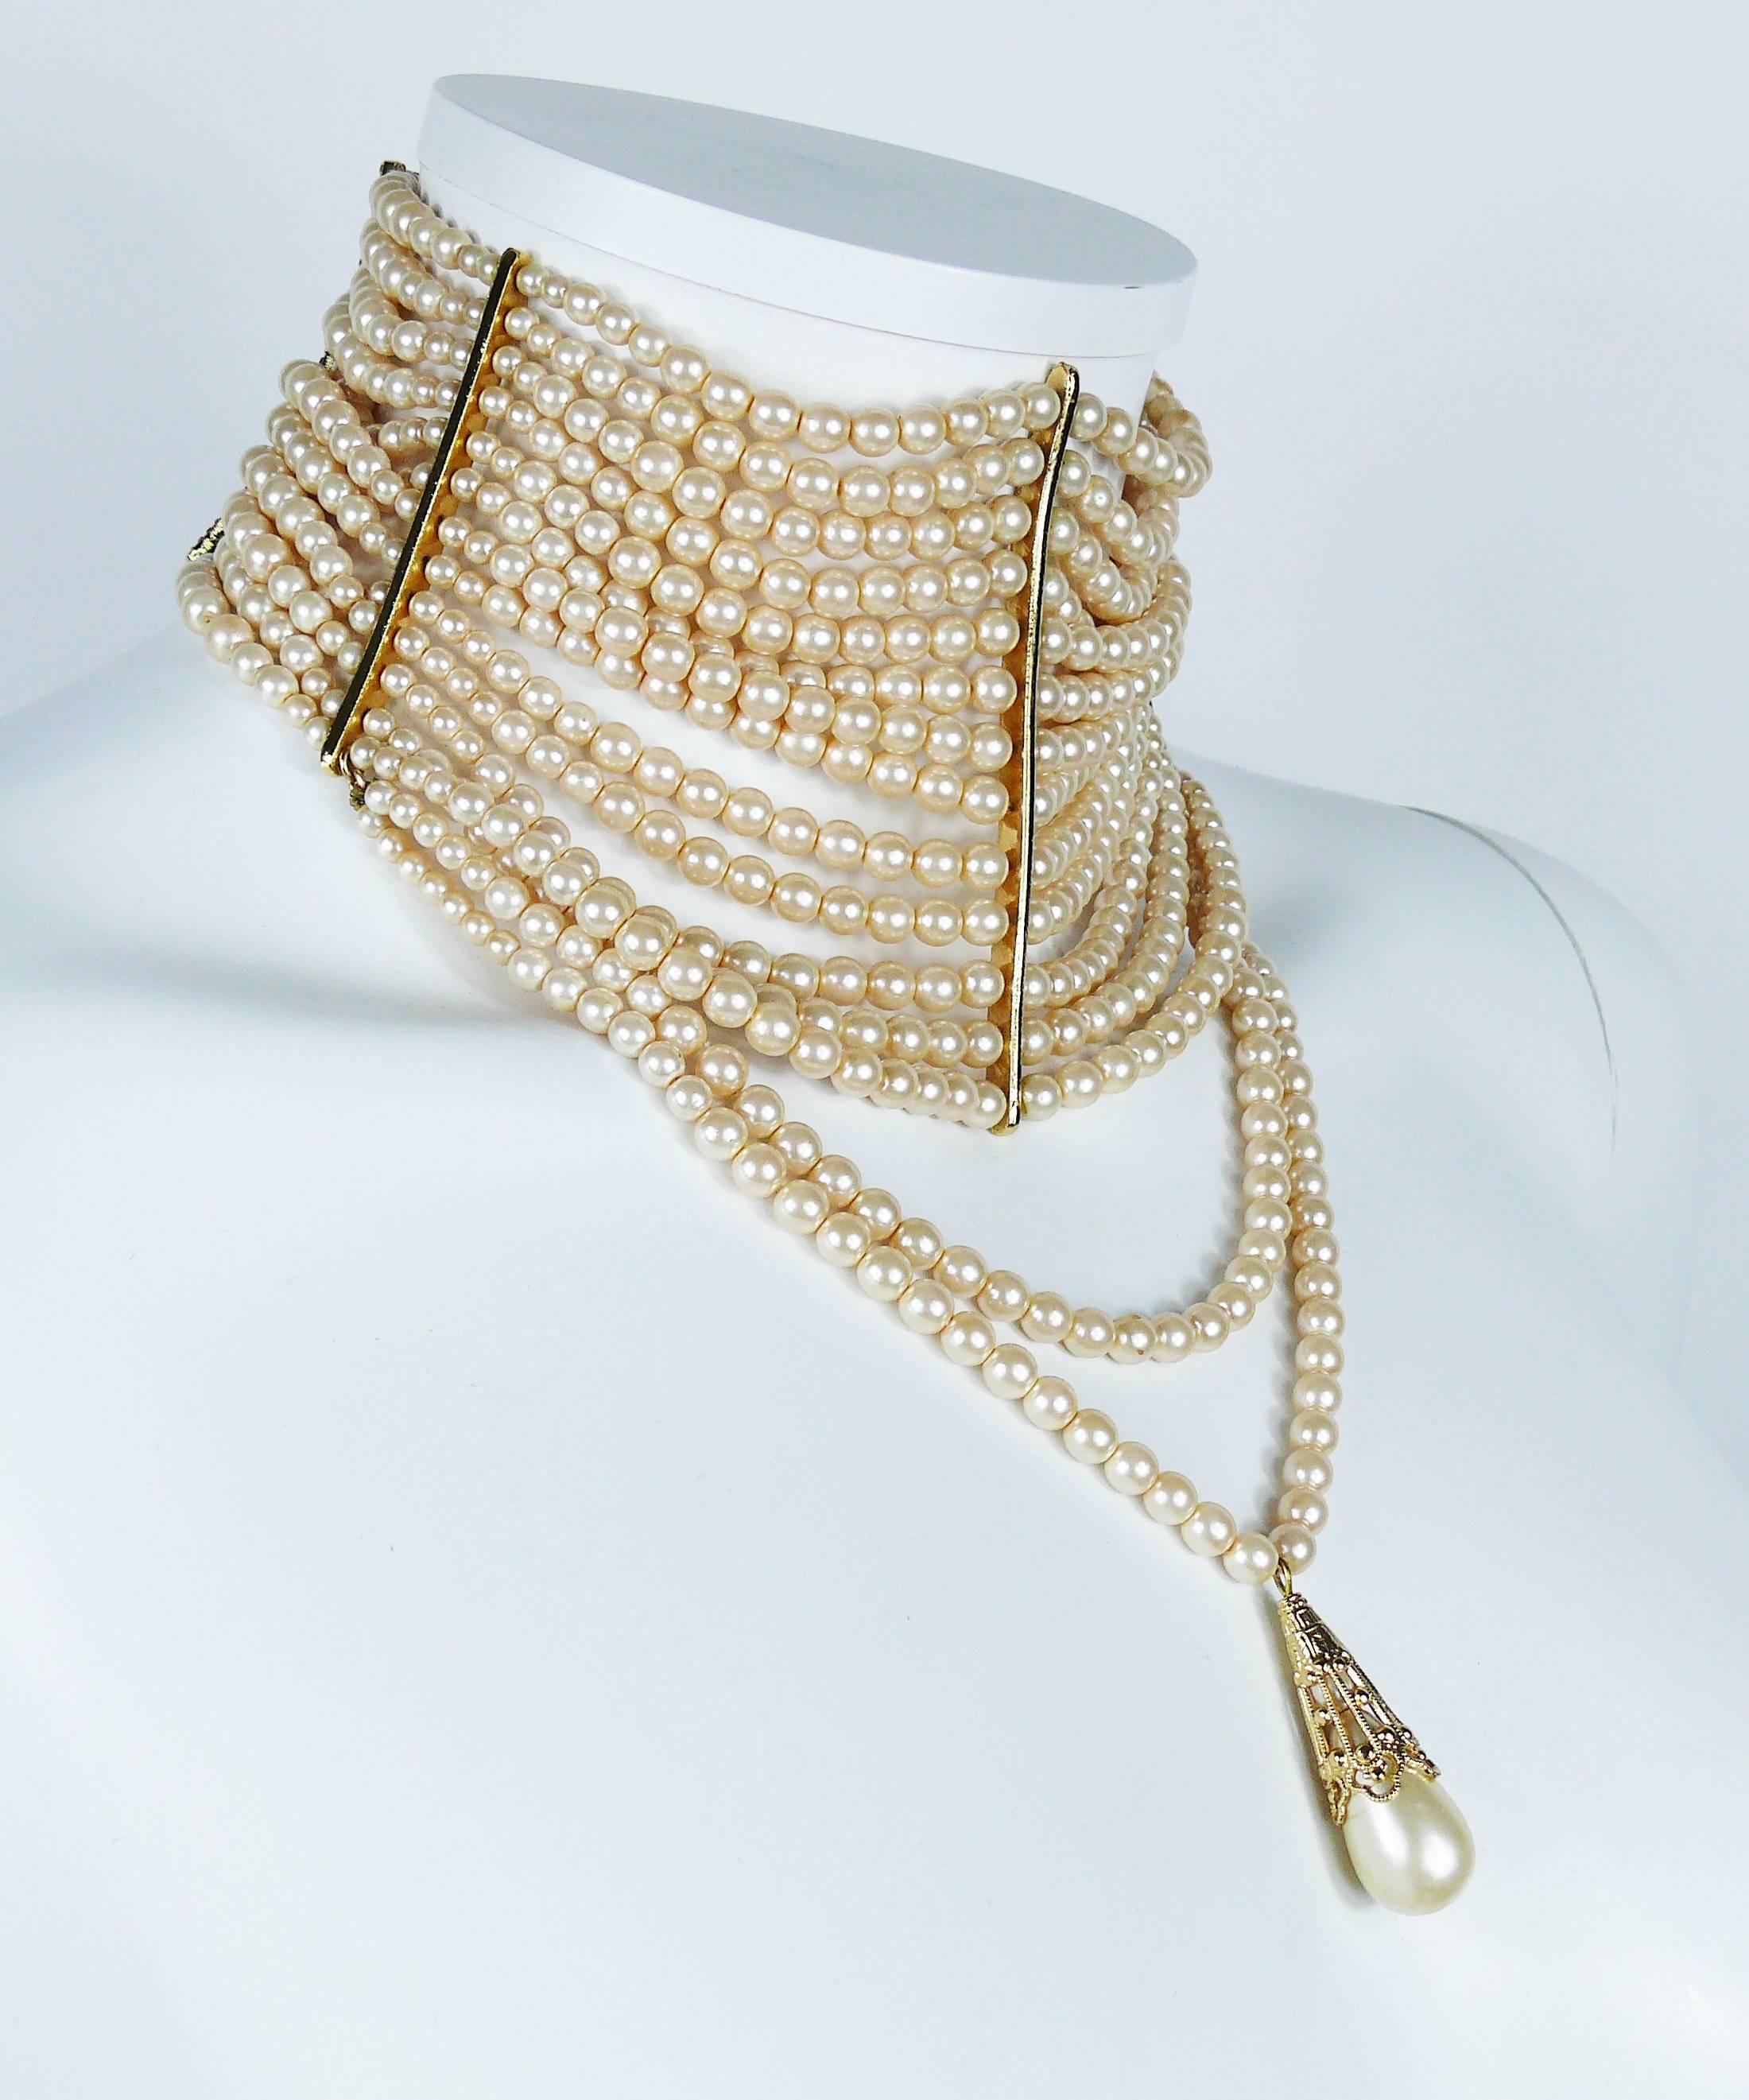 CHRISTIAN DIOR multi strand iconic Edwardian inspired couture pearl choker necklace.

This necklace features :
- 15 off-white glass pearl strands
- A large pearl drop.
- Gold toned setting.
- Hook clasps
- Extension chains.

Embossed